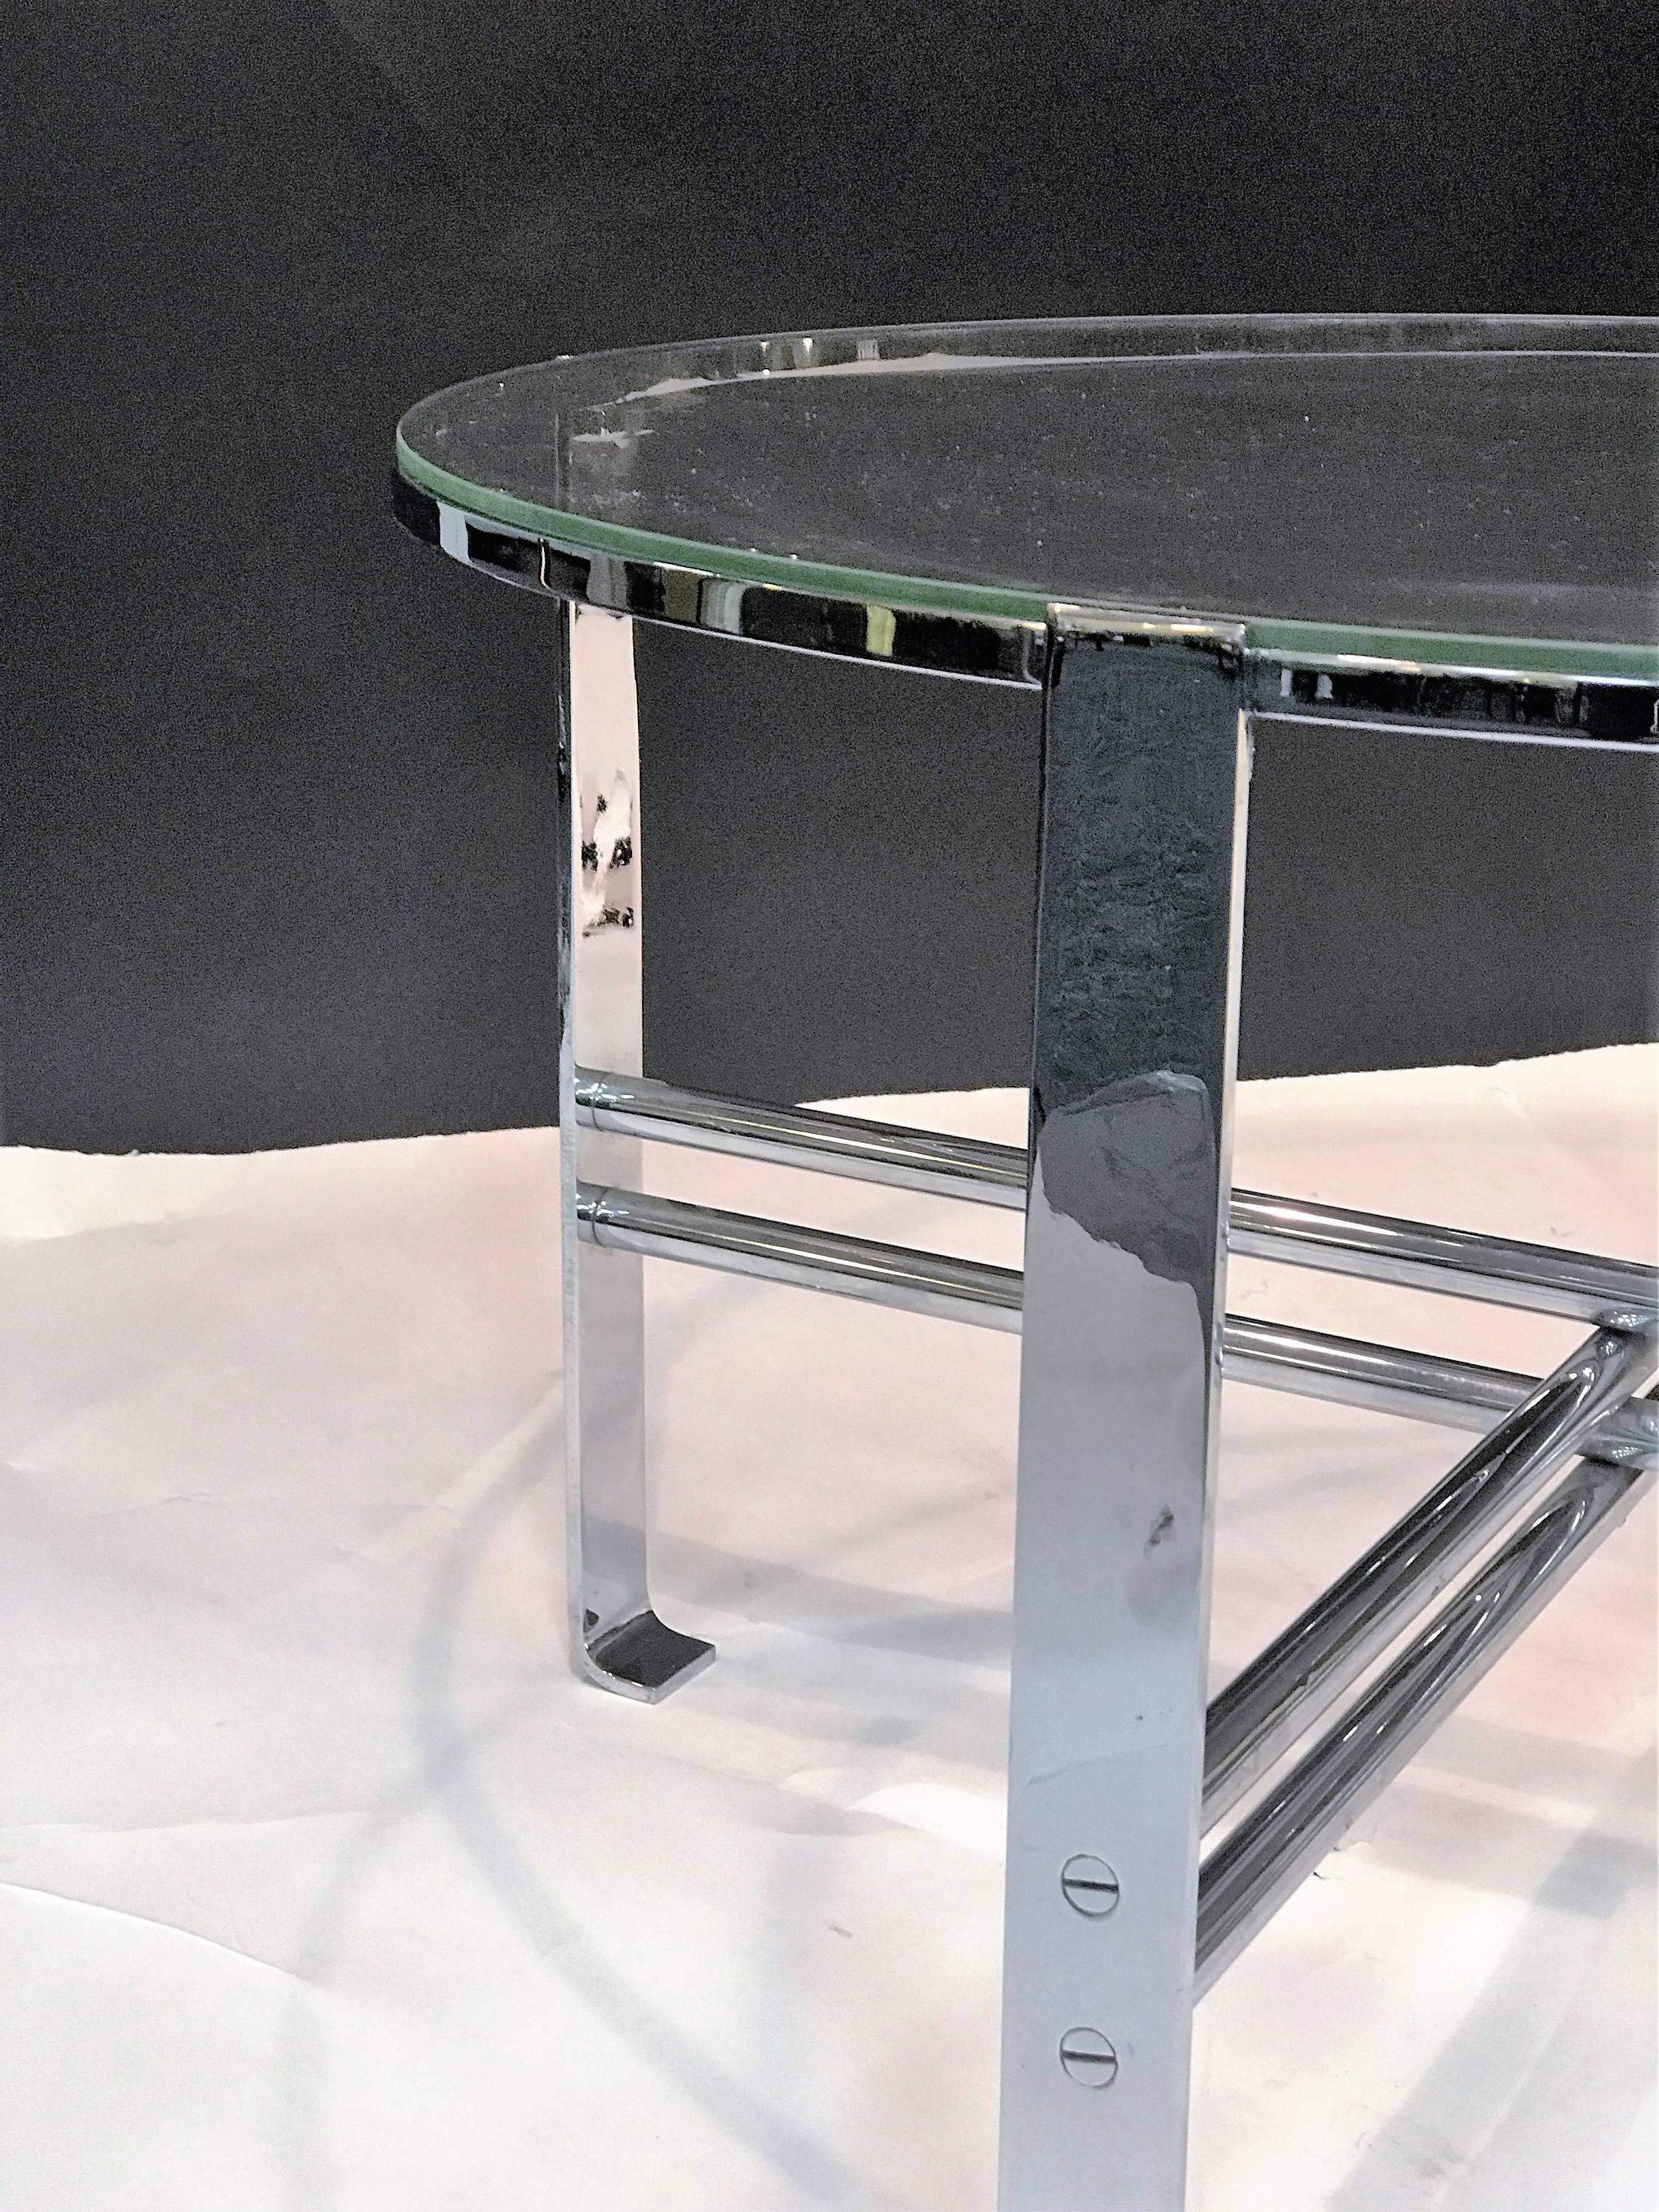 Rare Modernist Art Deco Table by Wolfgang Hoffman In Excellent Condition For Sale In Mount Penn, PA